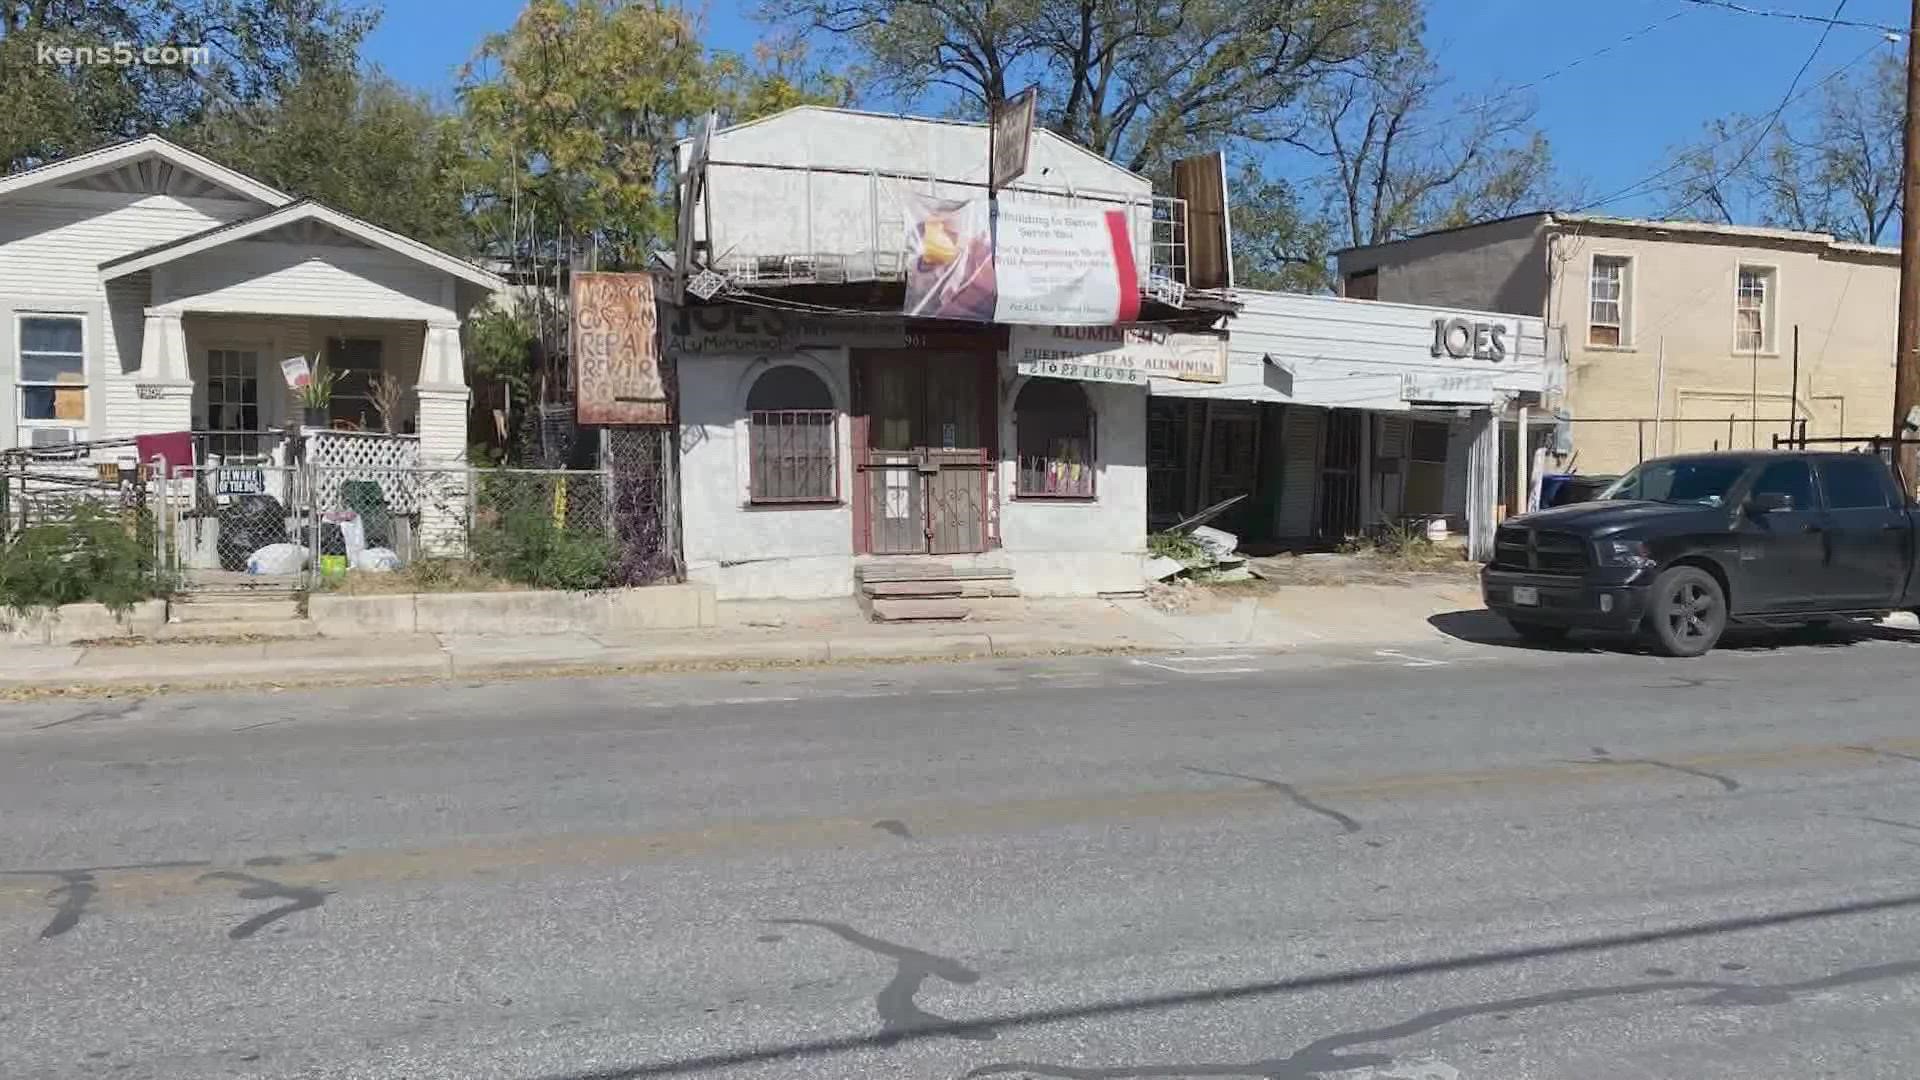 San Antonio city leaders claim a study from UT Law examining orders to vacate and demolish homes has "inaccurate" numbers, but researchers disagree.